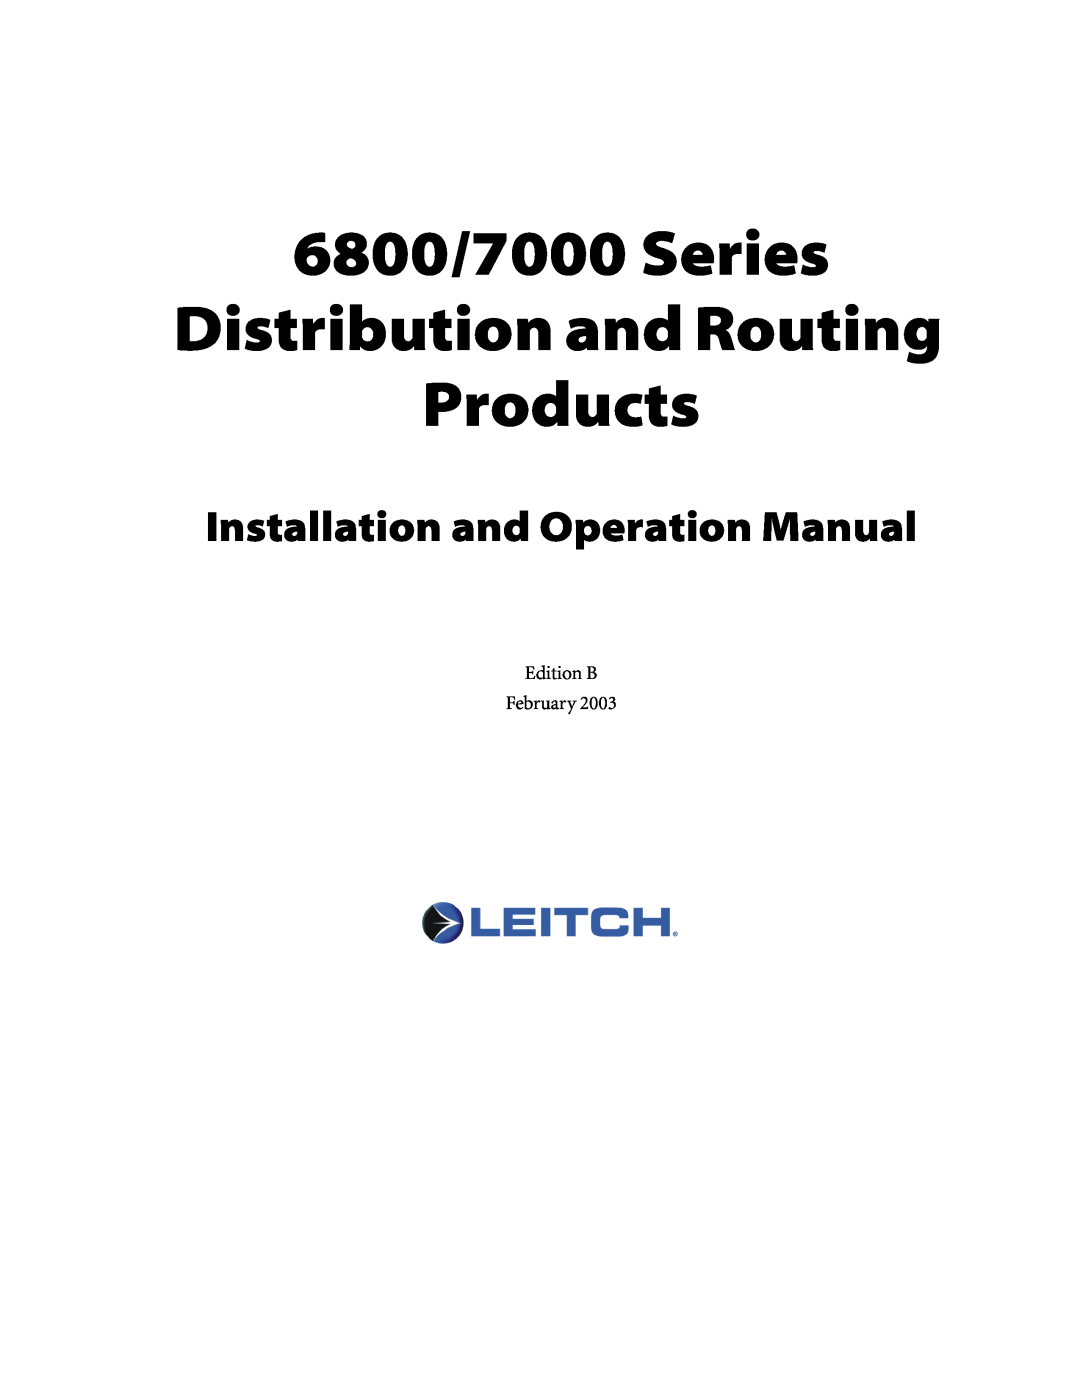 Nokia 6800 Series operation manual Installation and Operation Manual, 6800/7000 Series Distribution and Routing Products 